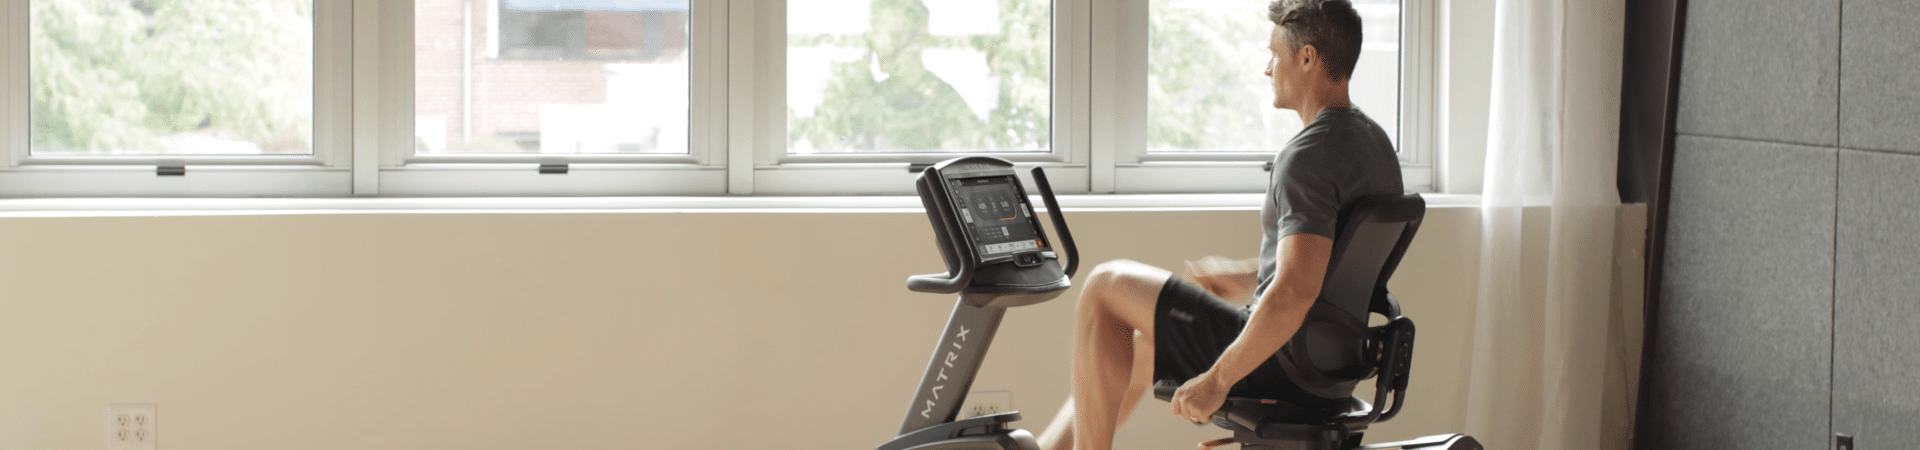 A man riding a stationary bike in front of a window